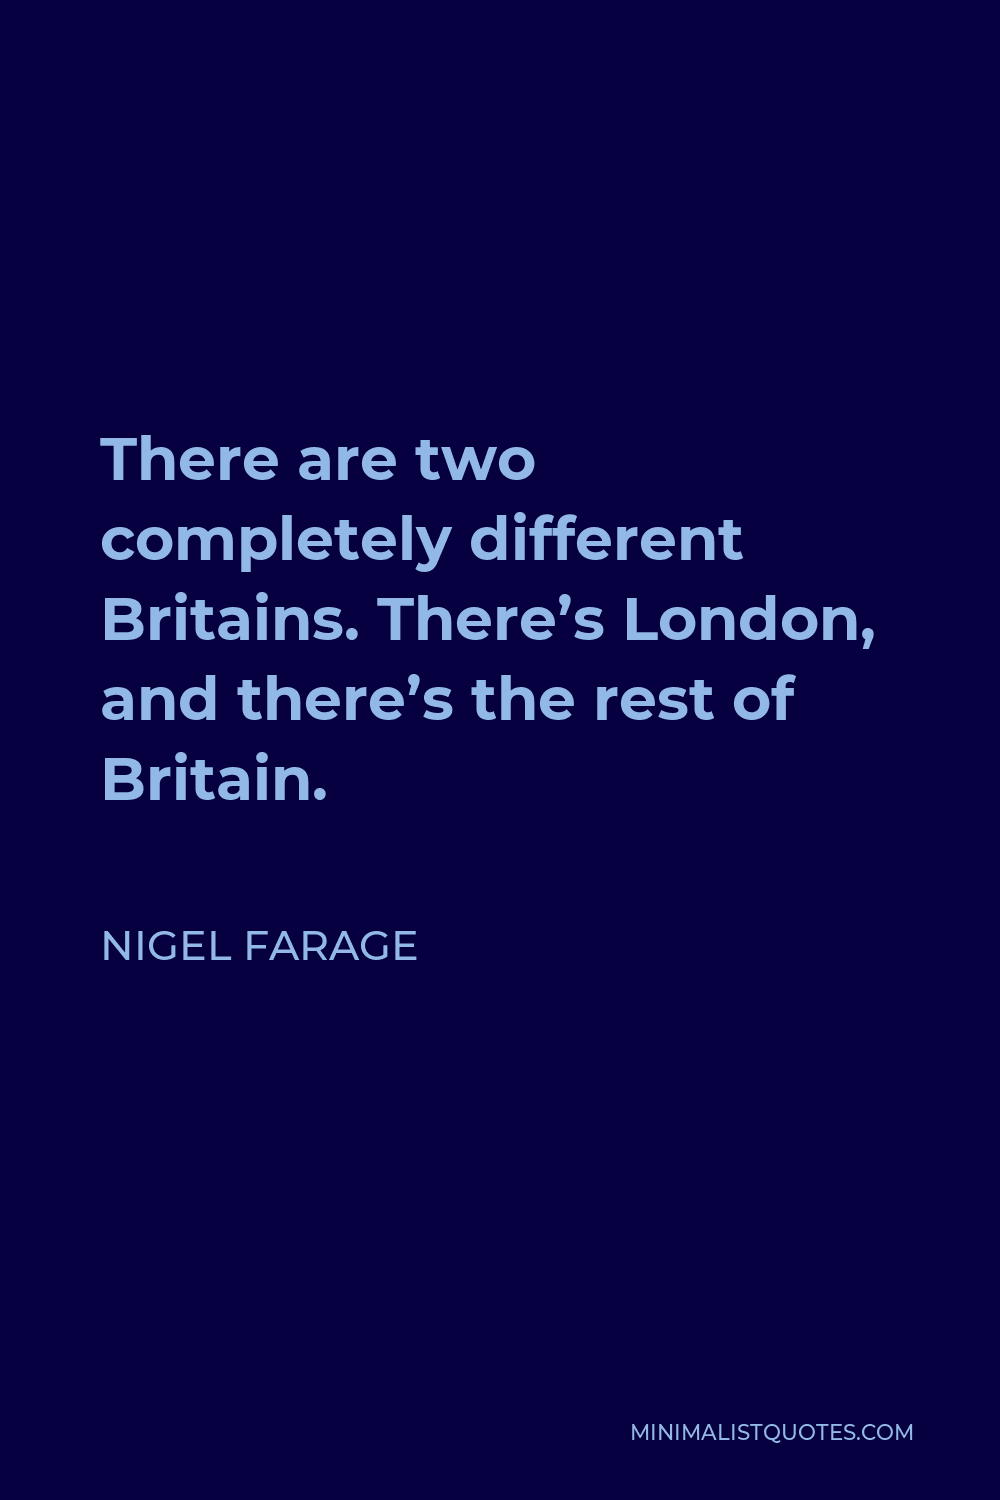 Nigel Farage Quote - There are two completely different Britains. There’s London, and there’s the rest of Britain.